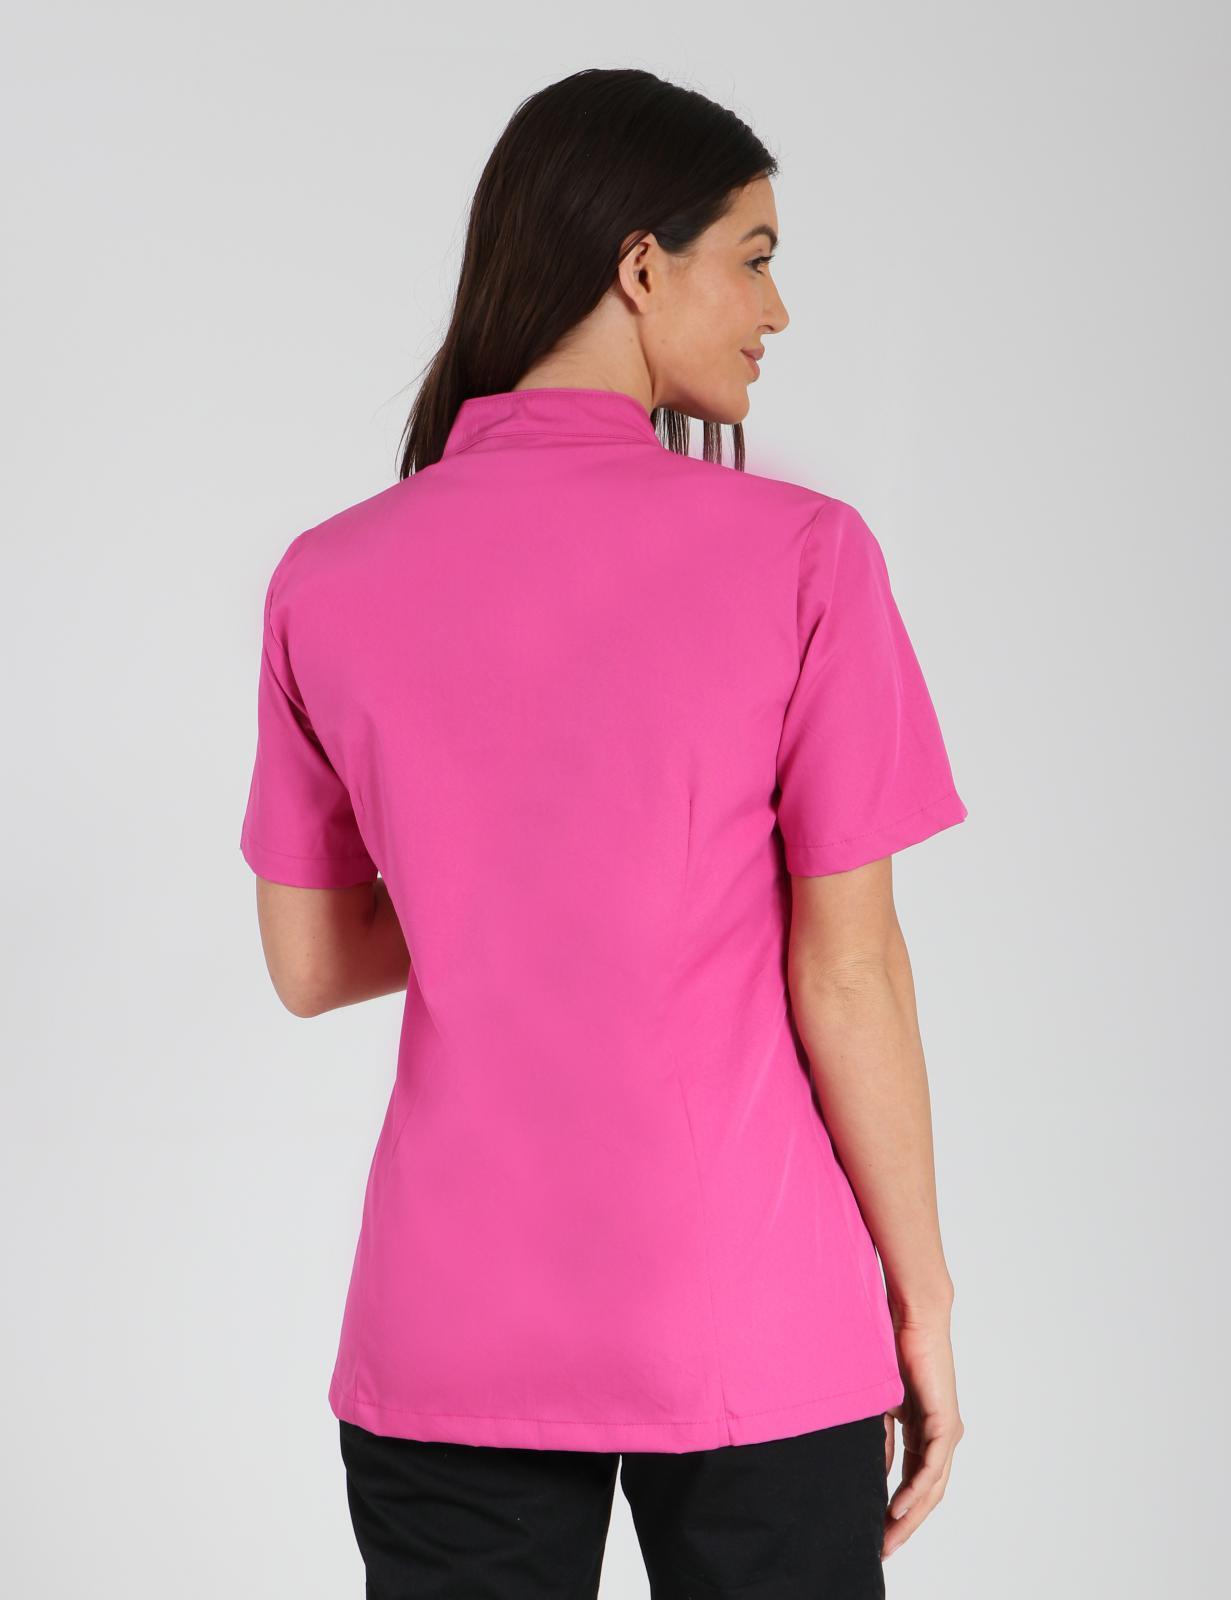 Jessie Style Tunic Top - Pink - 3X Large - 1